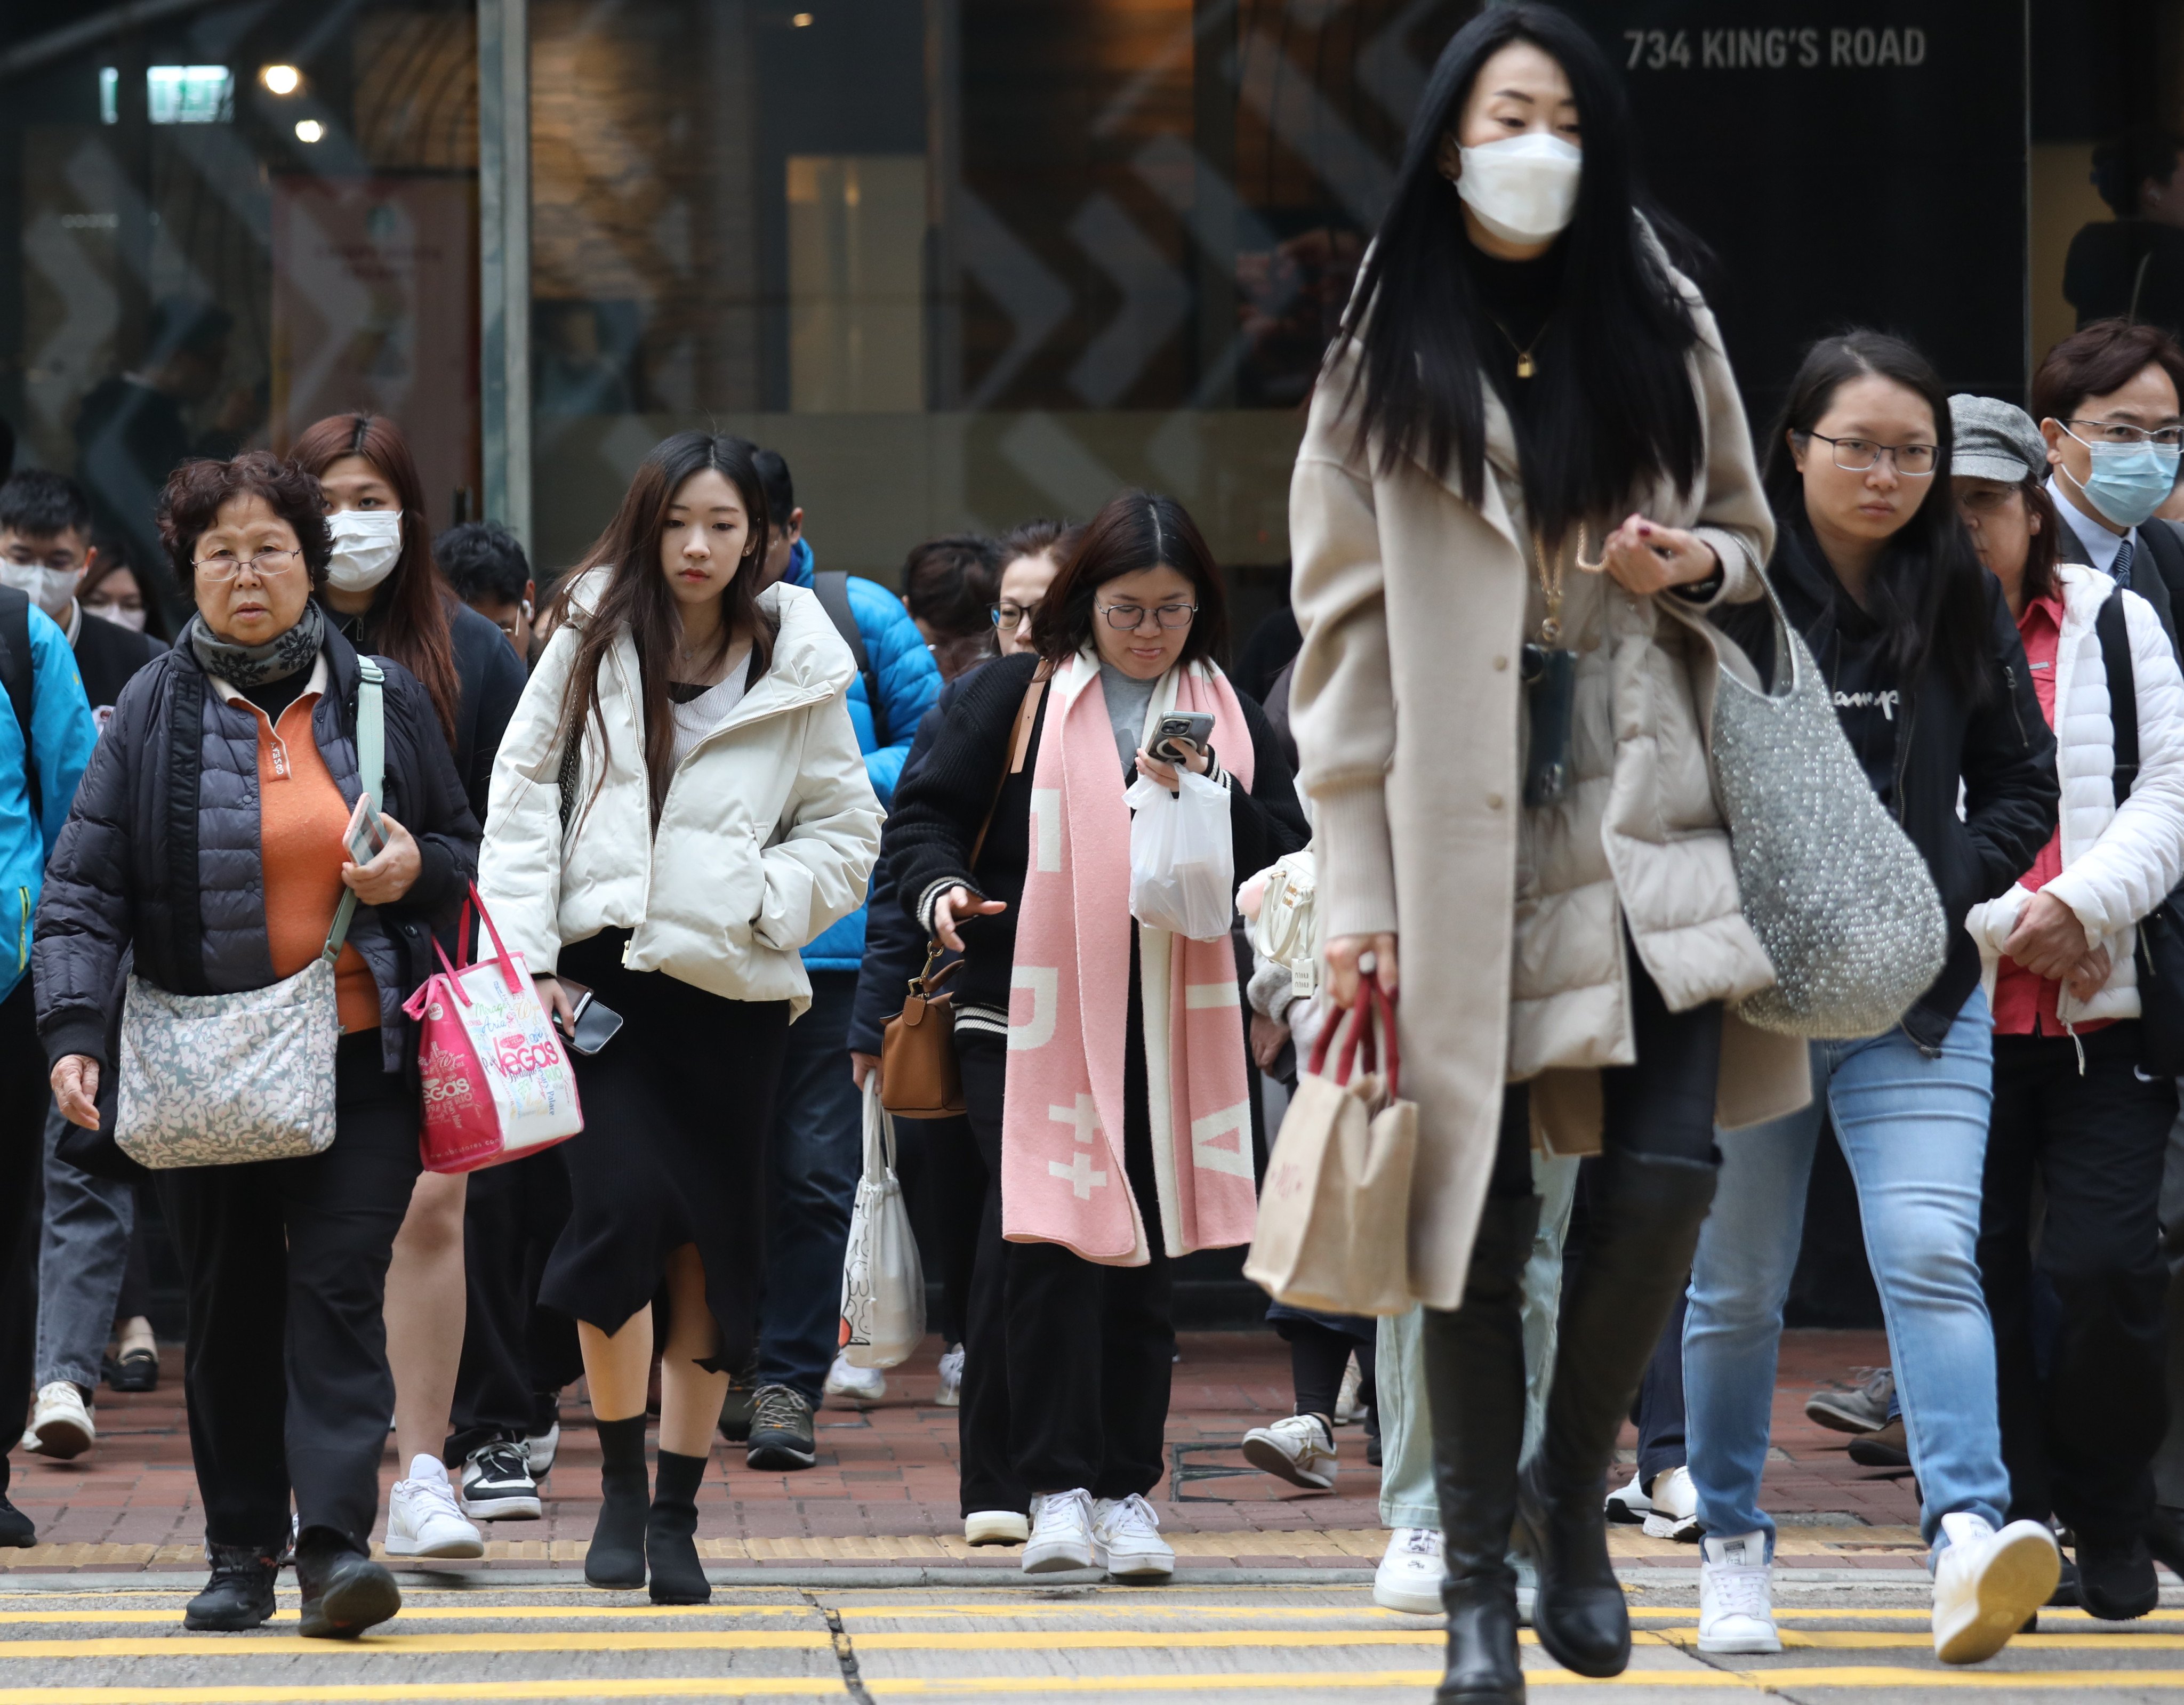 Hongkongers wrap up warm against the cold on Friday. Photo: Xiaomei Chen